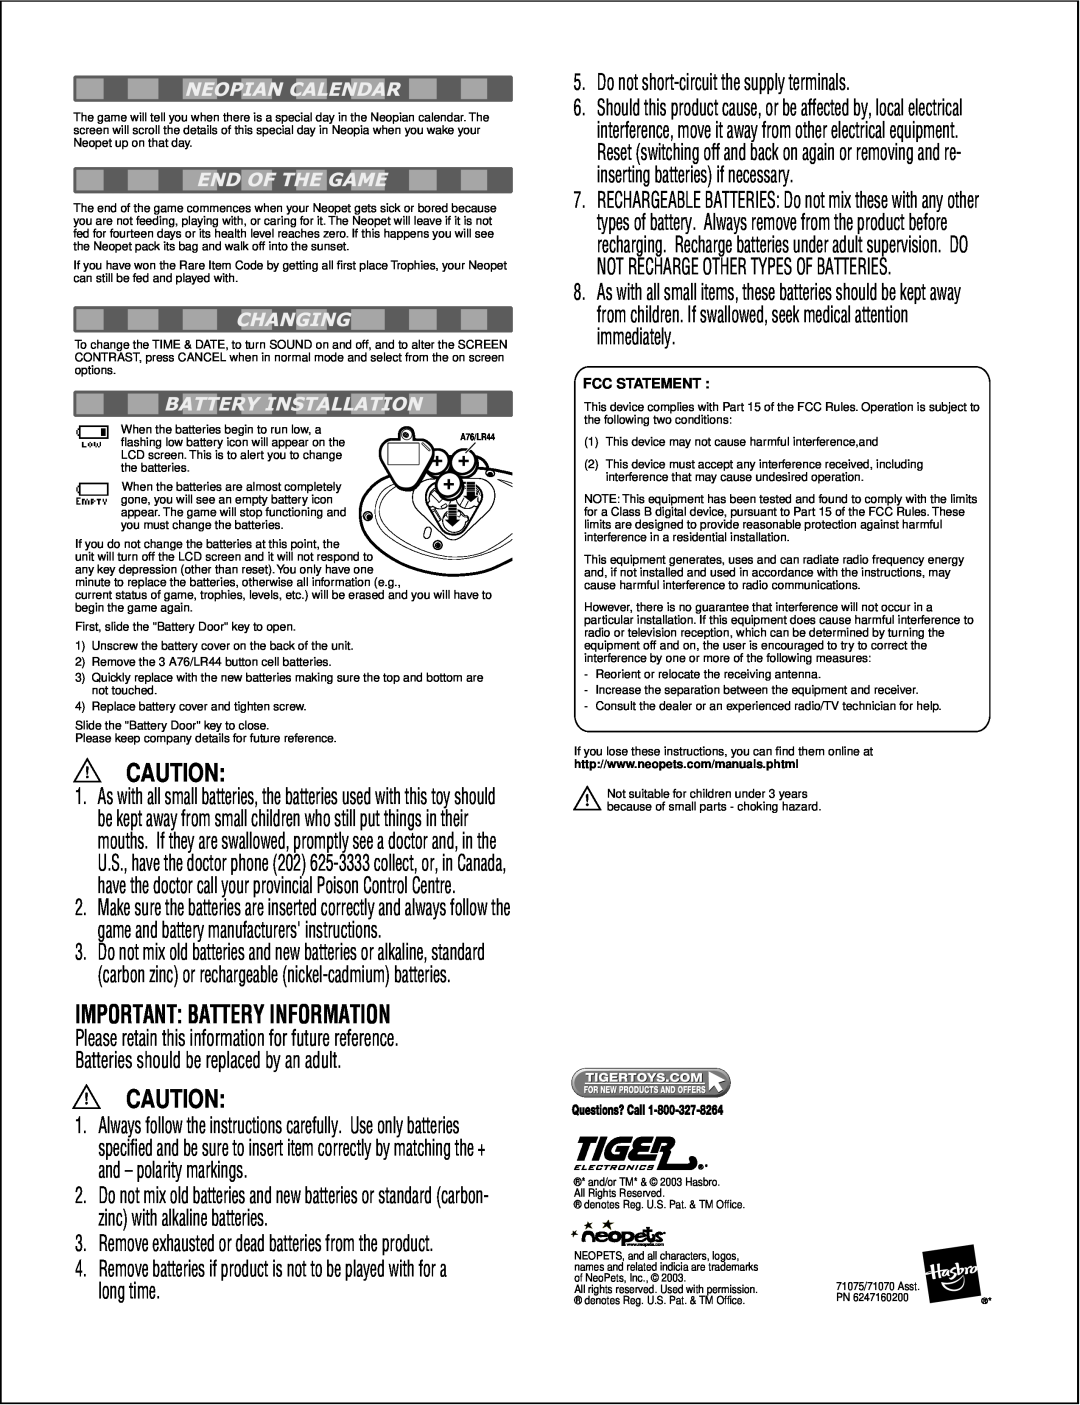 Tiger 71070 Asst Batteryinstallation, Important Battery Information, Please retain this information for future reference 